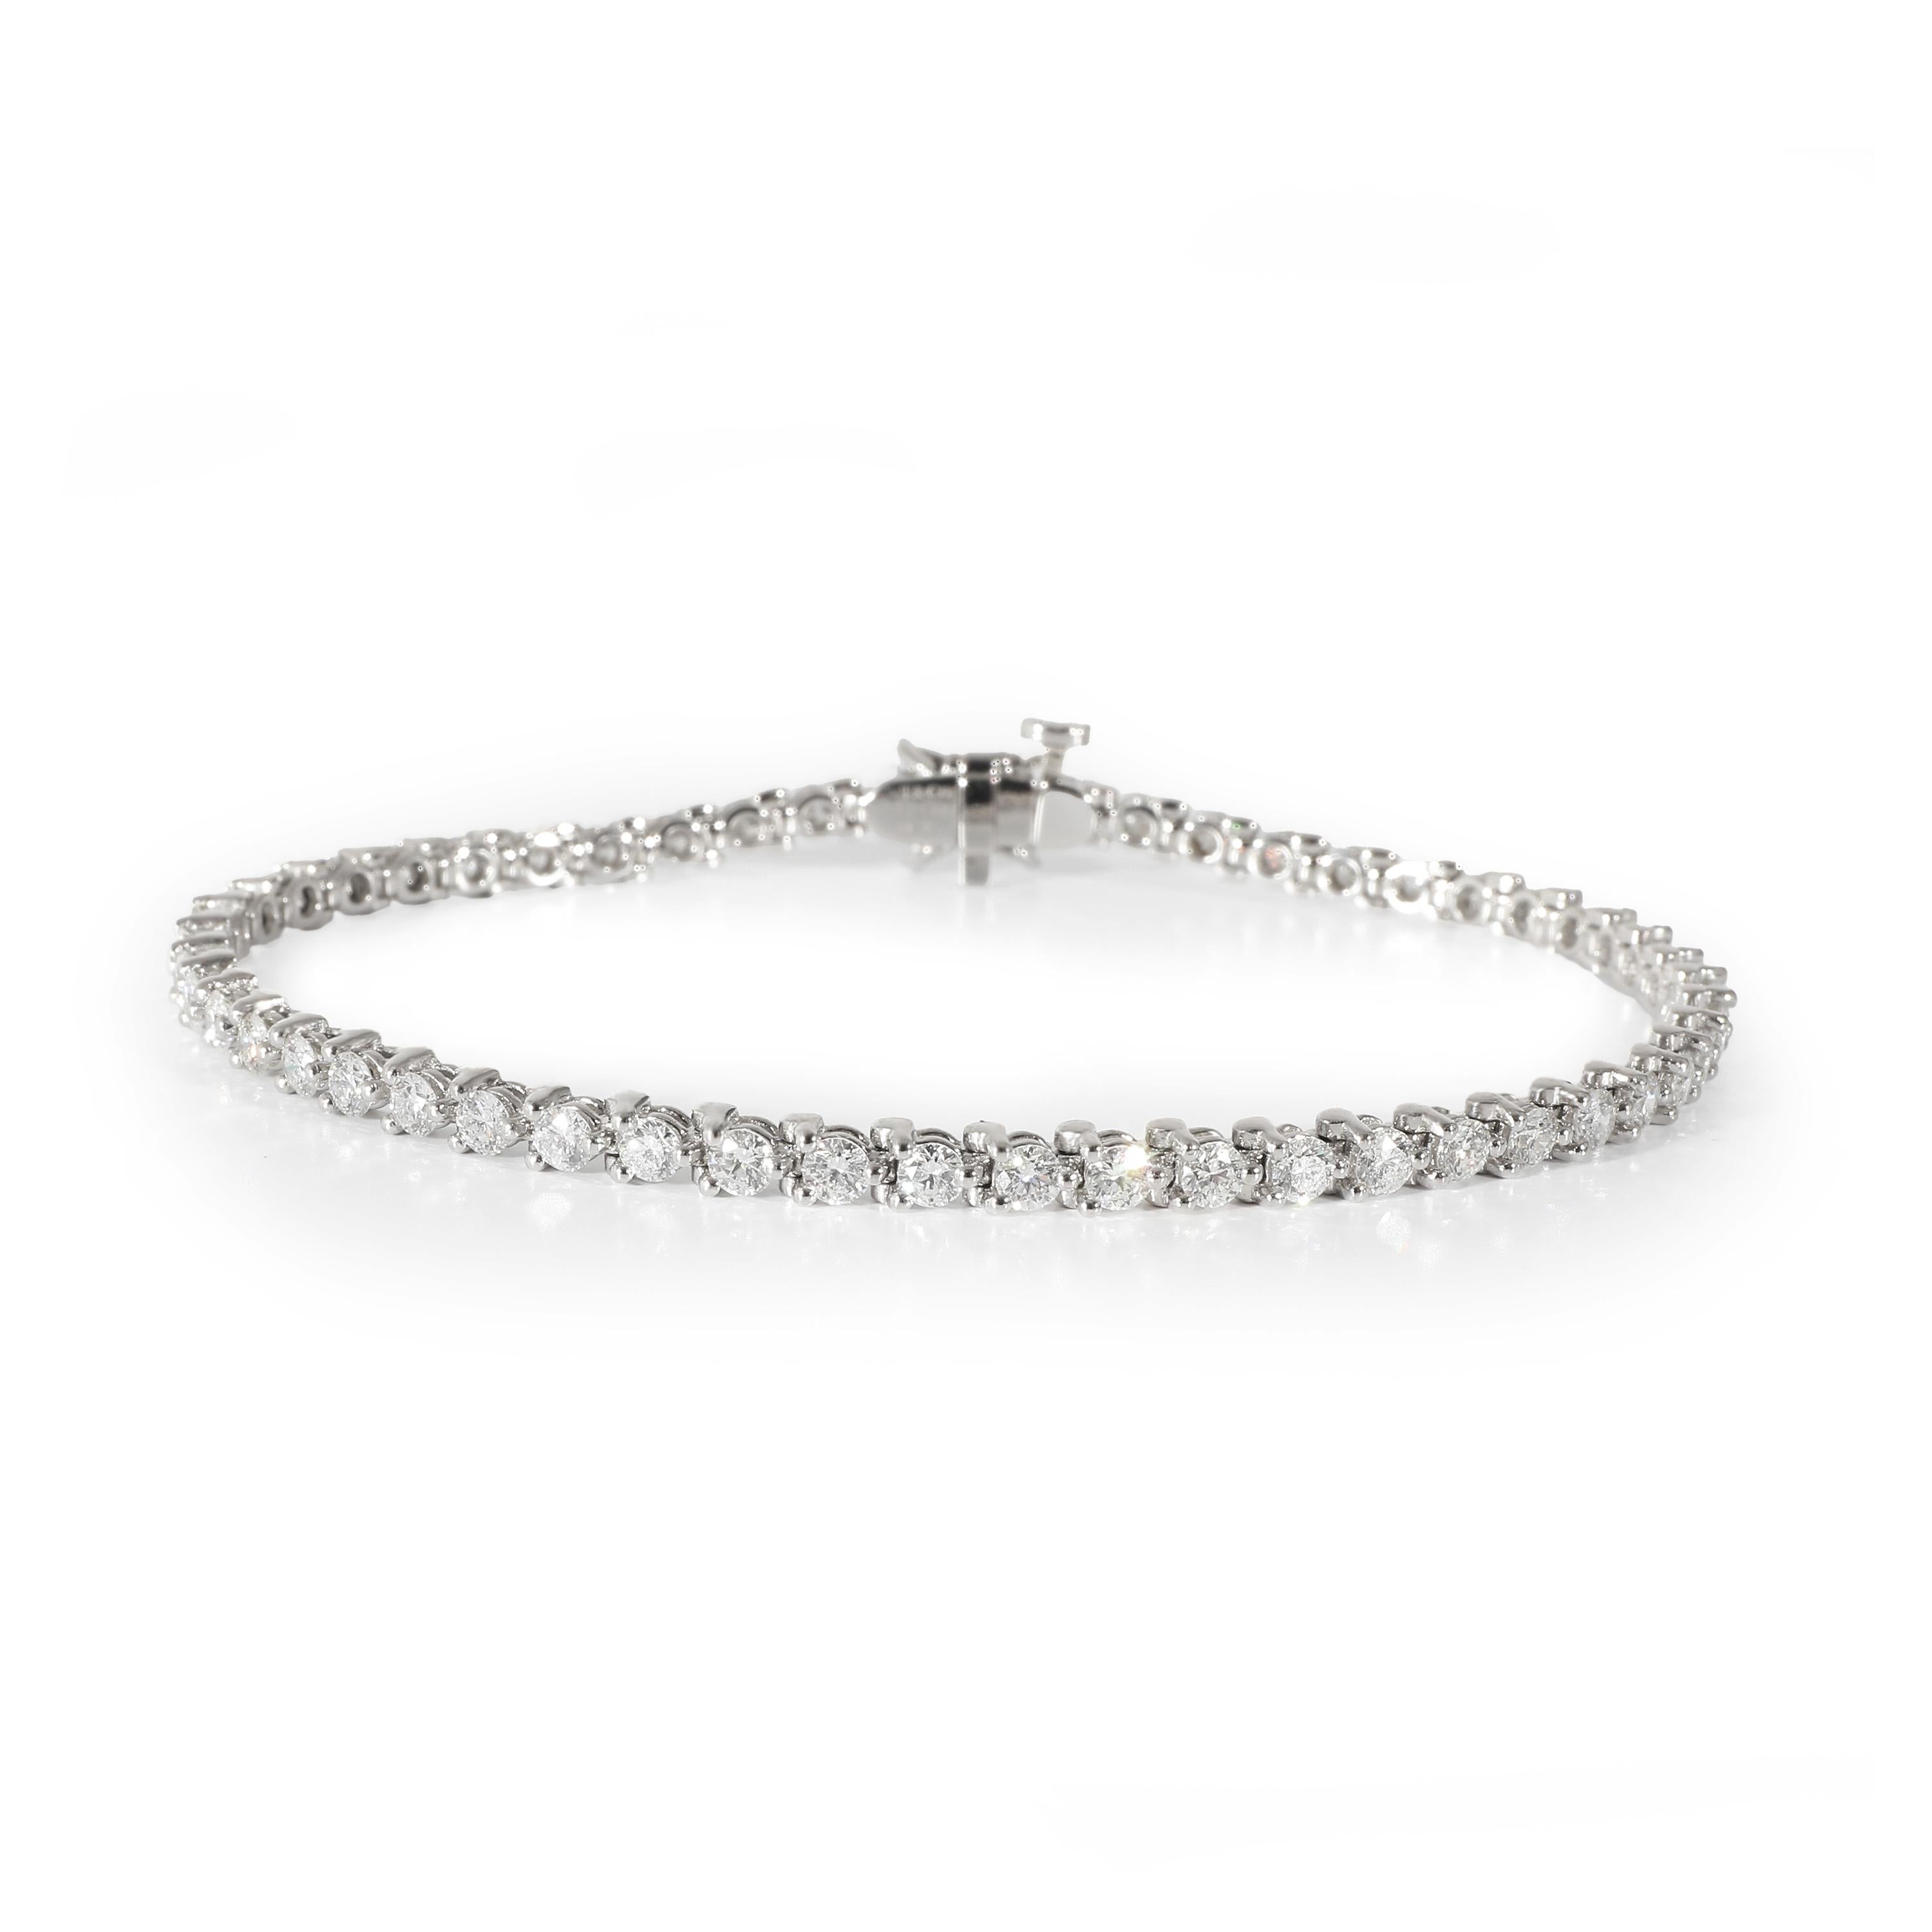 Tiffany & Co. Victoria Bracelet in  Platinum 2.90 CTW

PRIMARY DETAILS
SKU: 133530
Listing Title: Tiffany & Co. Victoria Bracelet in  Platinum 2.90 CTW
Condition Description: An ode to the natural world, the Victoria collection by Tiffany & Co.